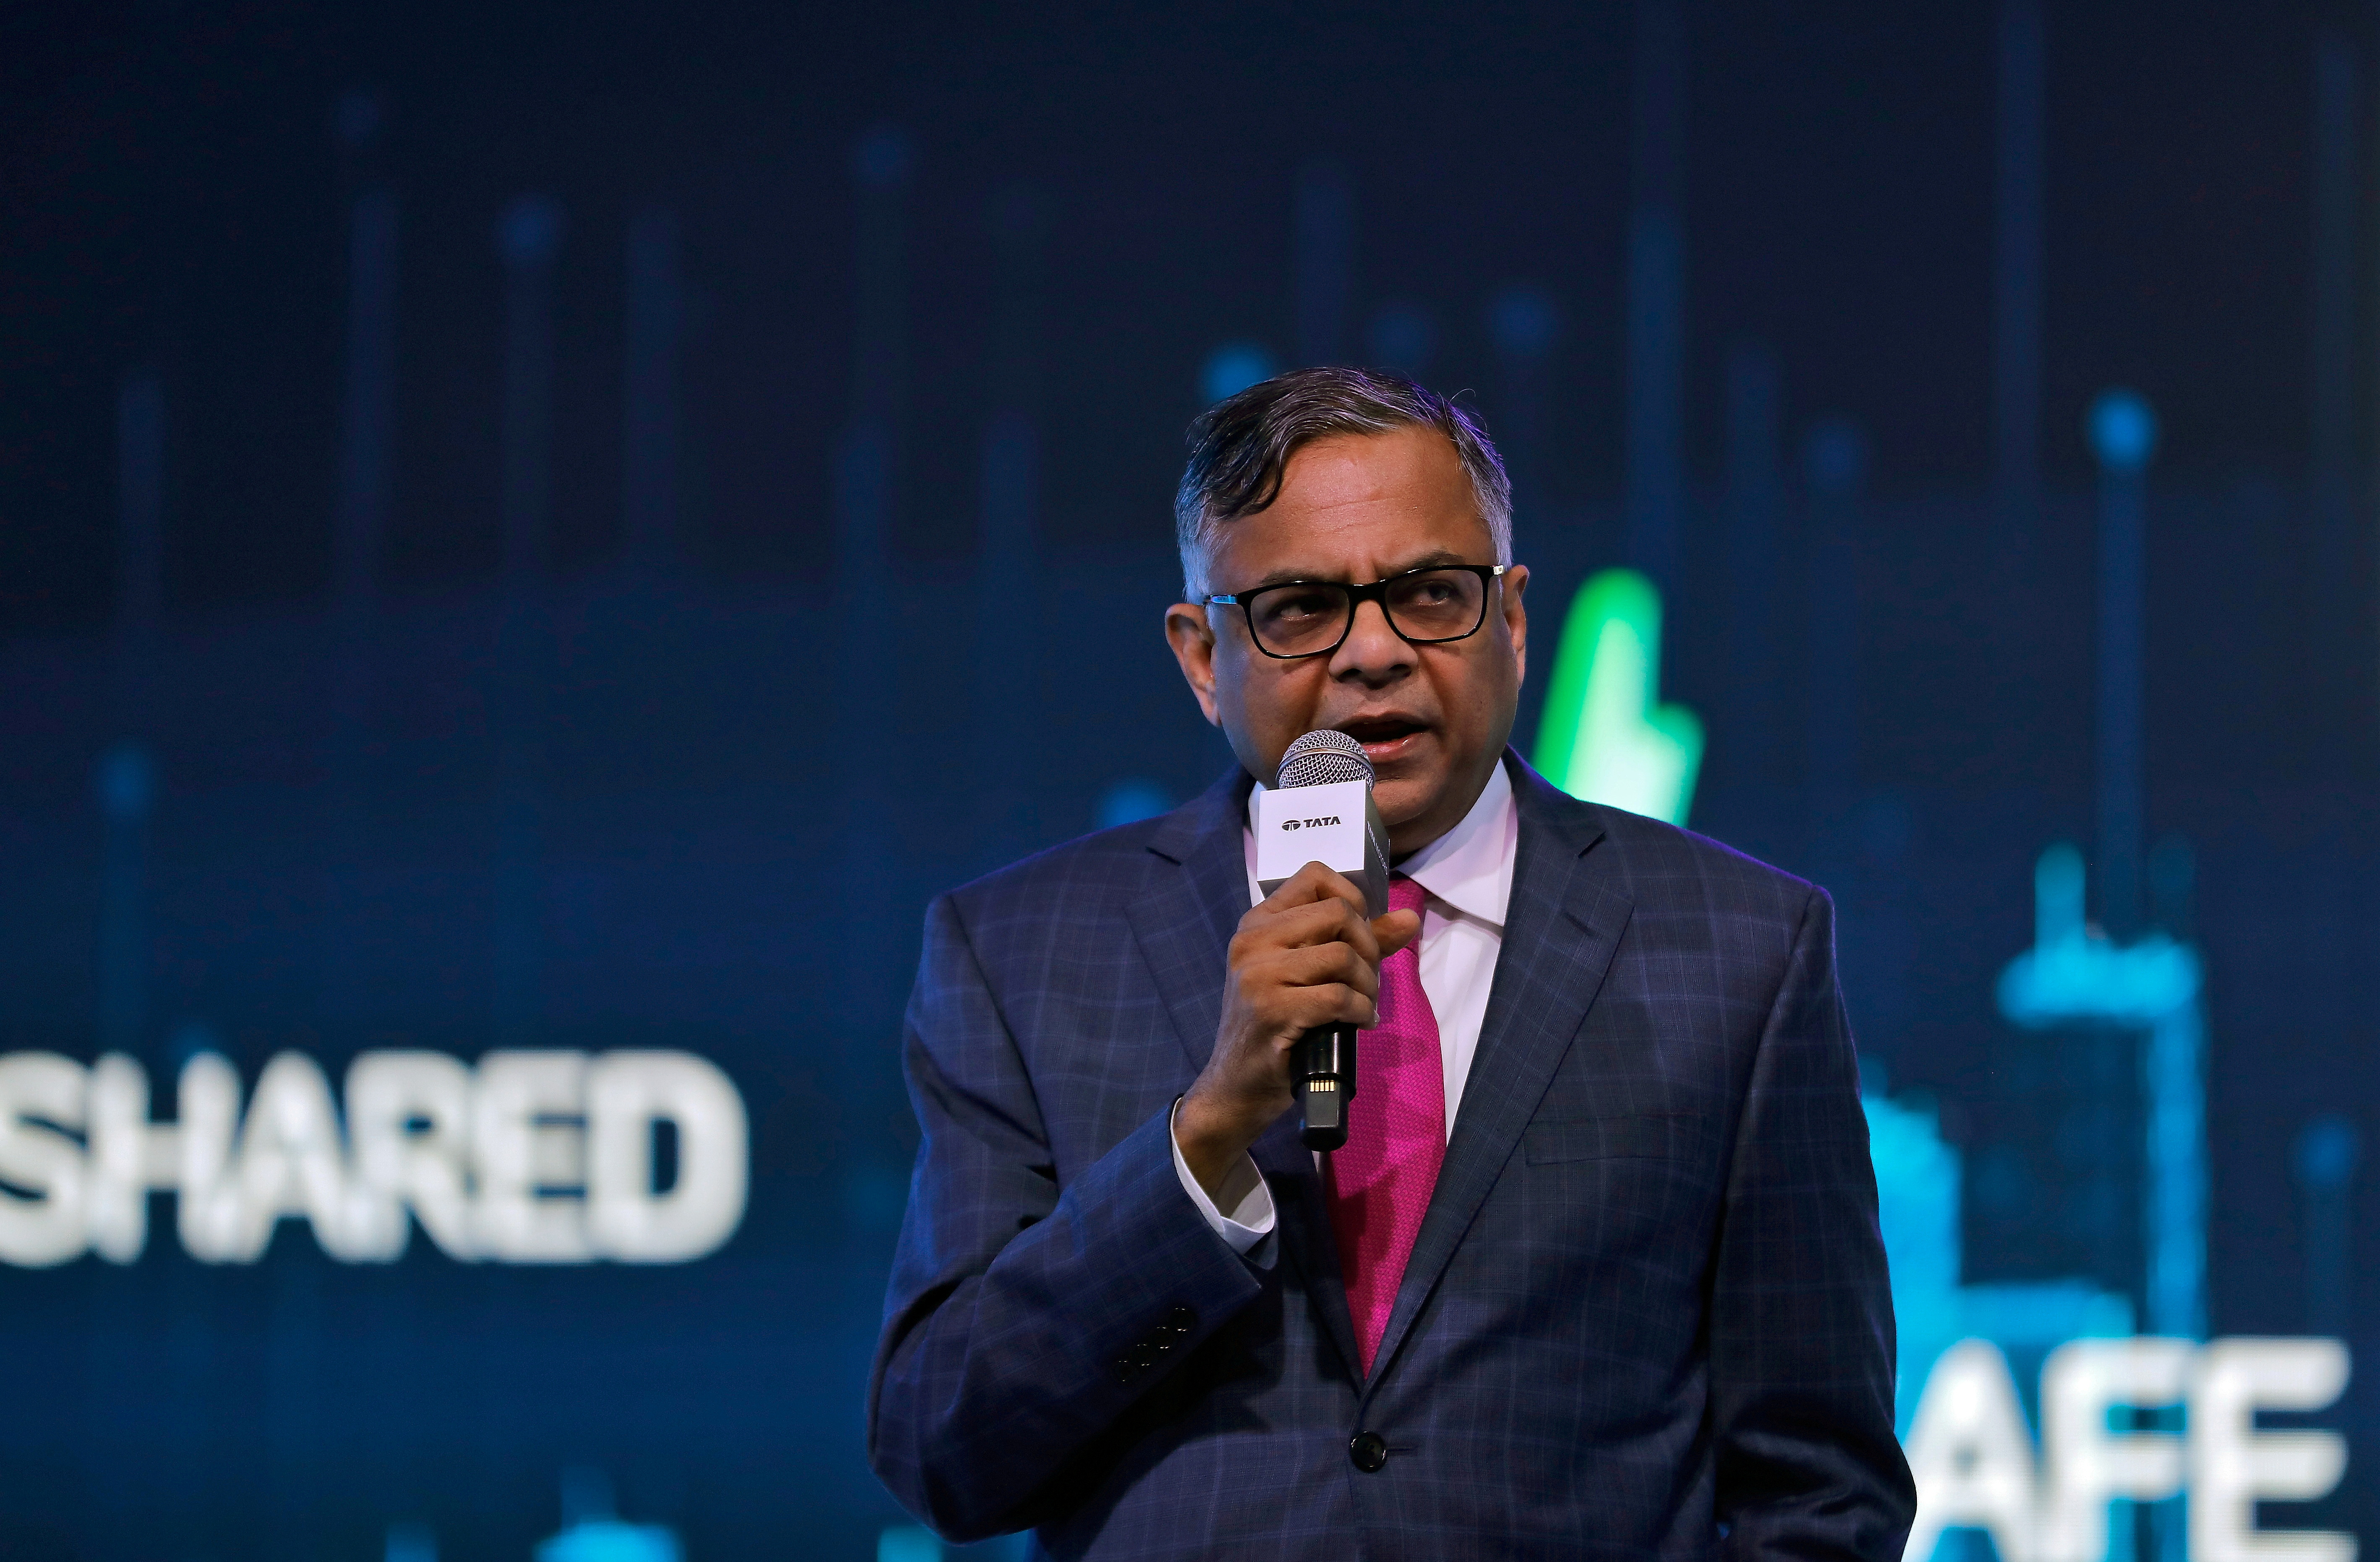 N Chandrasekaran, Chairman of Tata Sons, speaks at the unveiling of Tata Motors HBX compact SUV at the India Auto Expo 2020 in Greater Noida